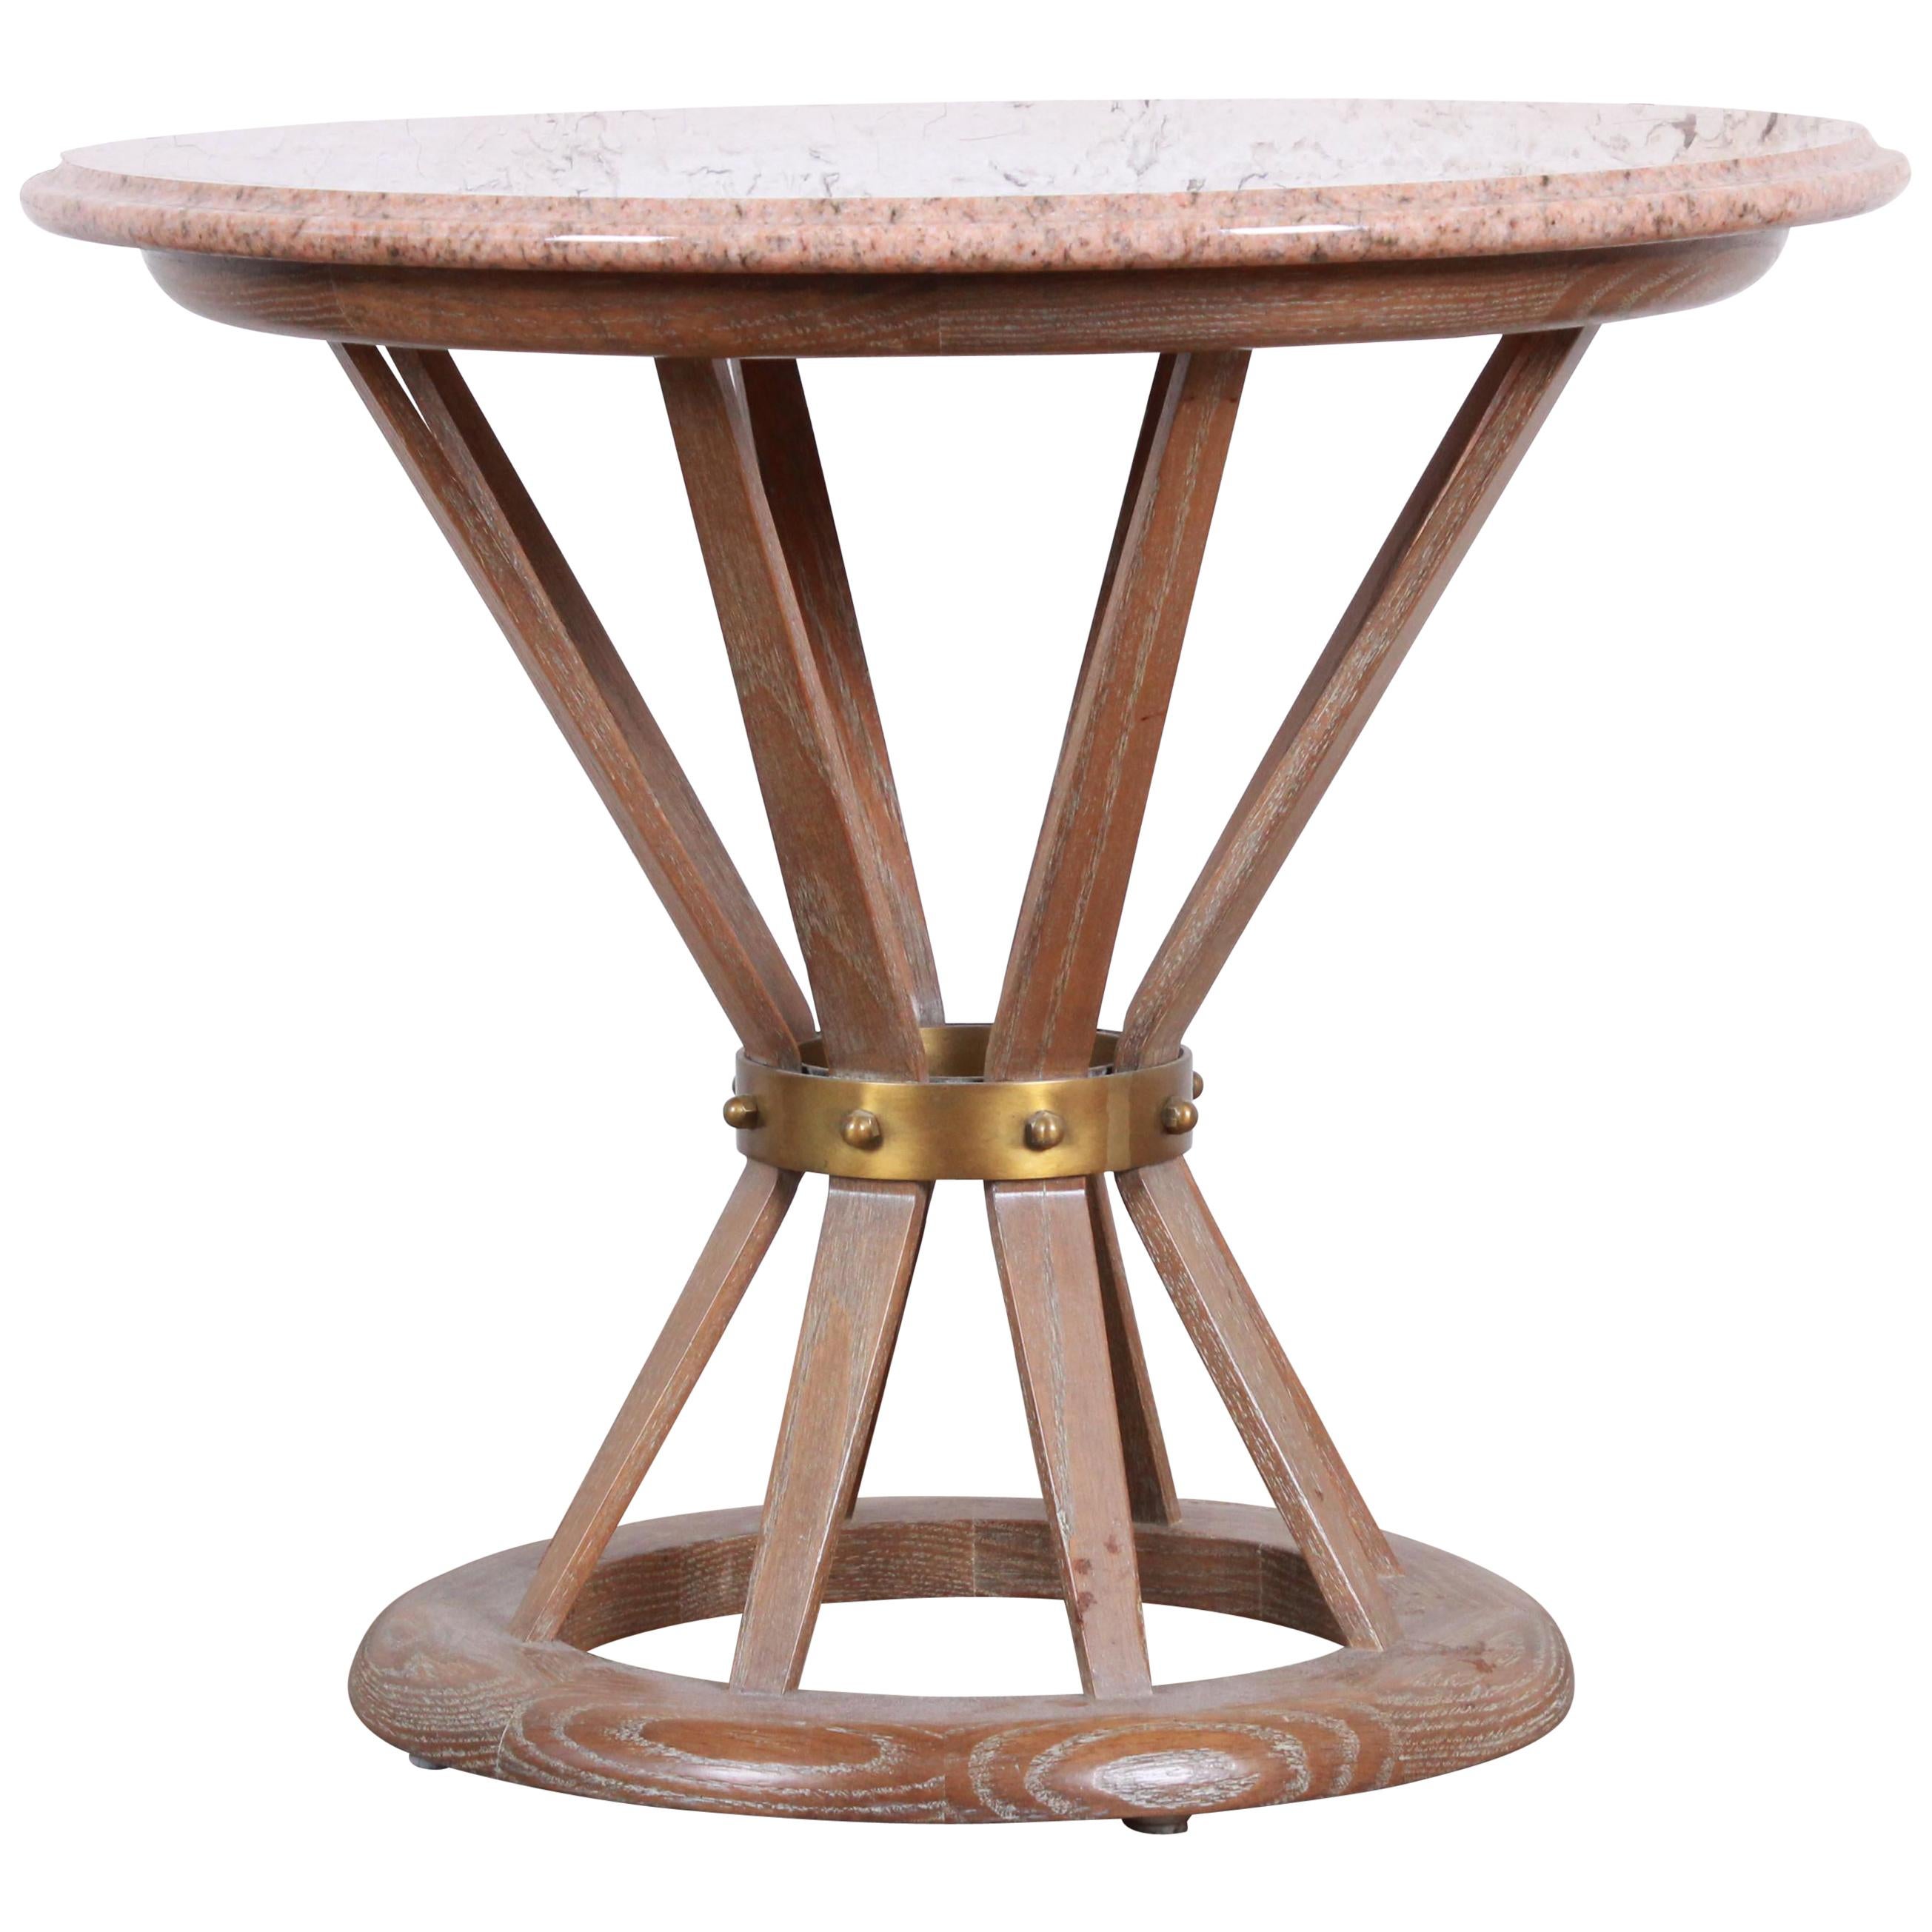 Edward Wormey for Dunbar Style Sheaf of Wheat Marble-Top Side Tables